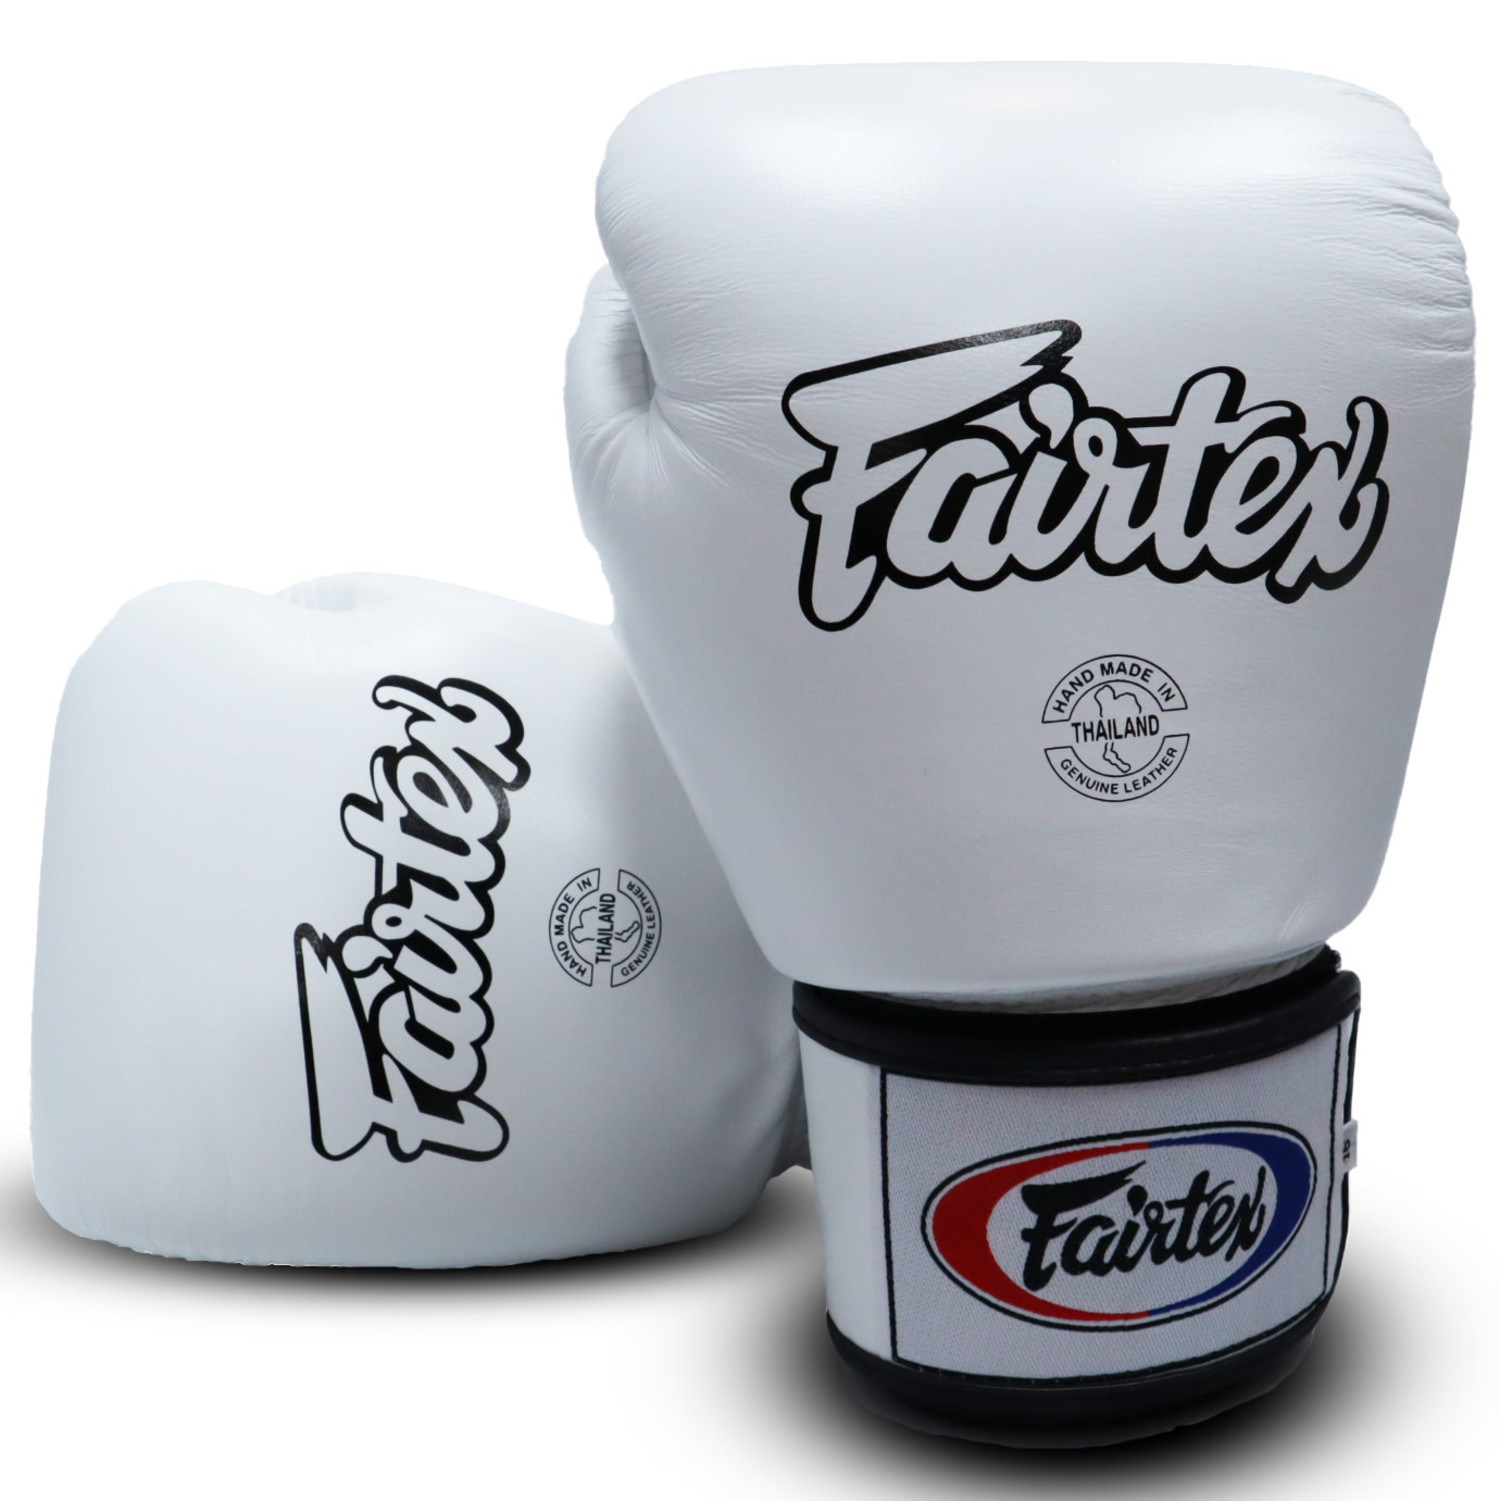 Thai Boxing Gloves - White/Gold - Live Fit. Apparel